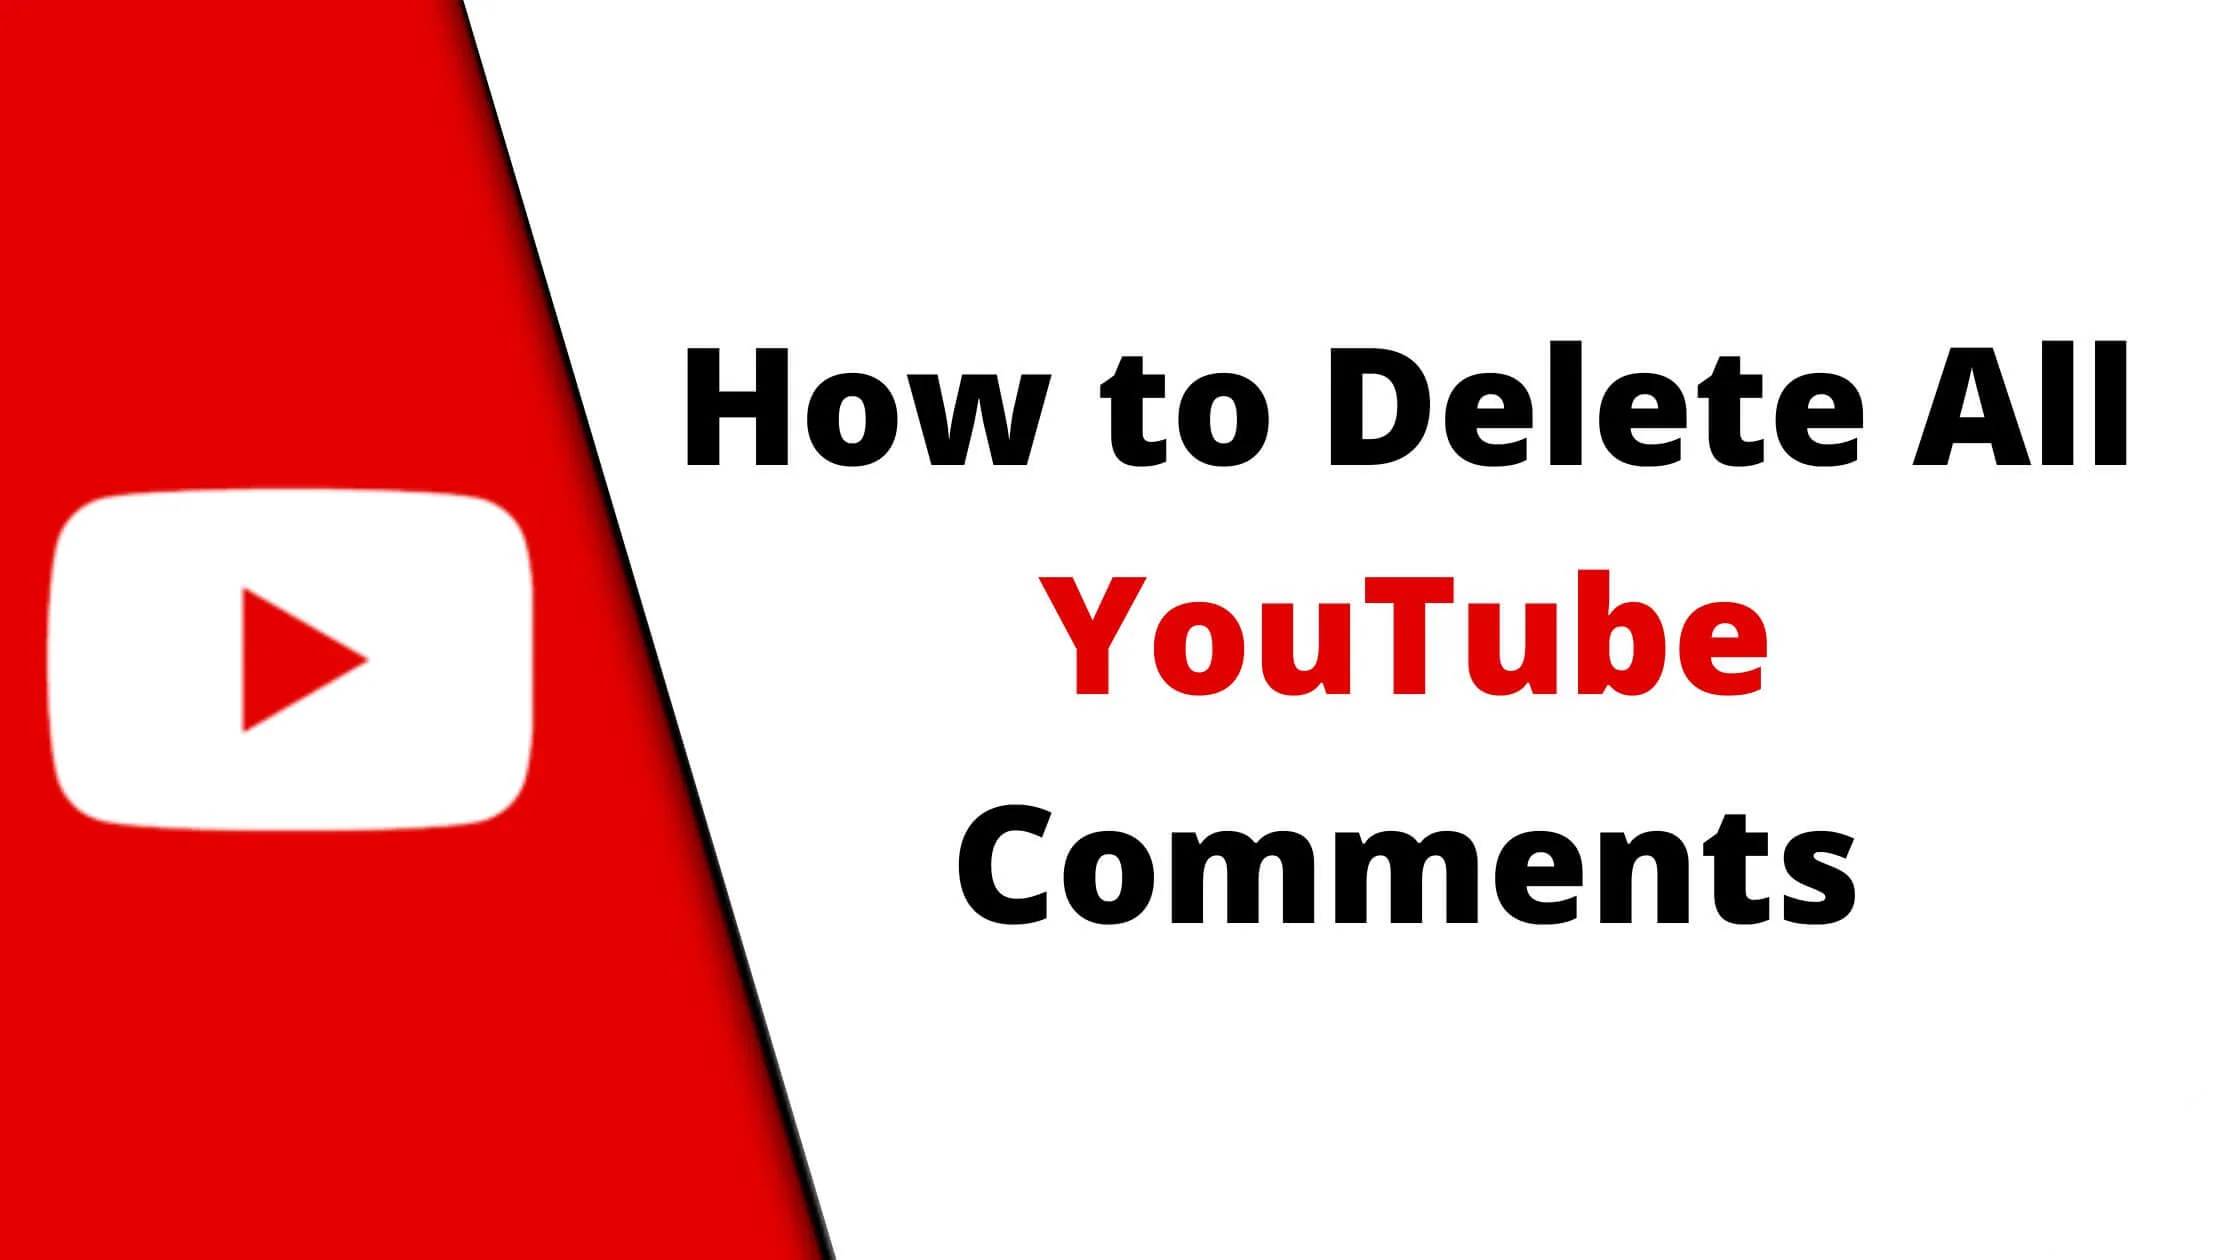 How to Delete All YouTube Comments